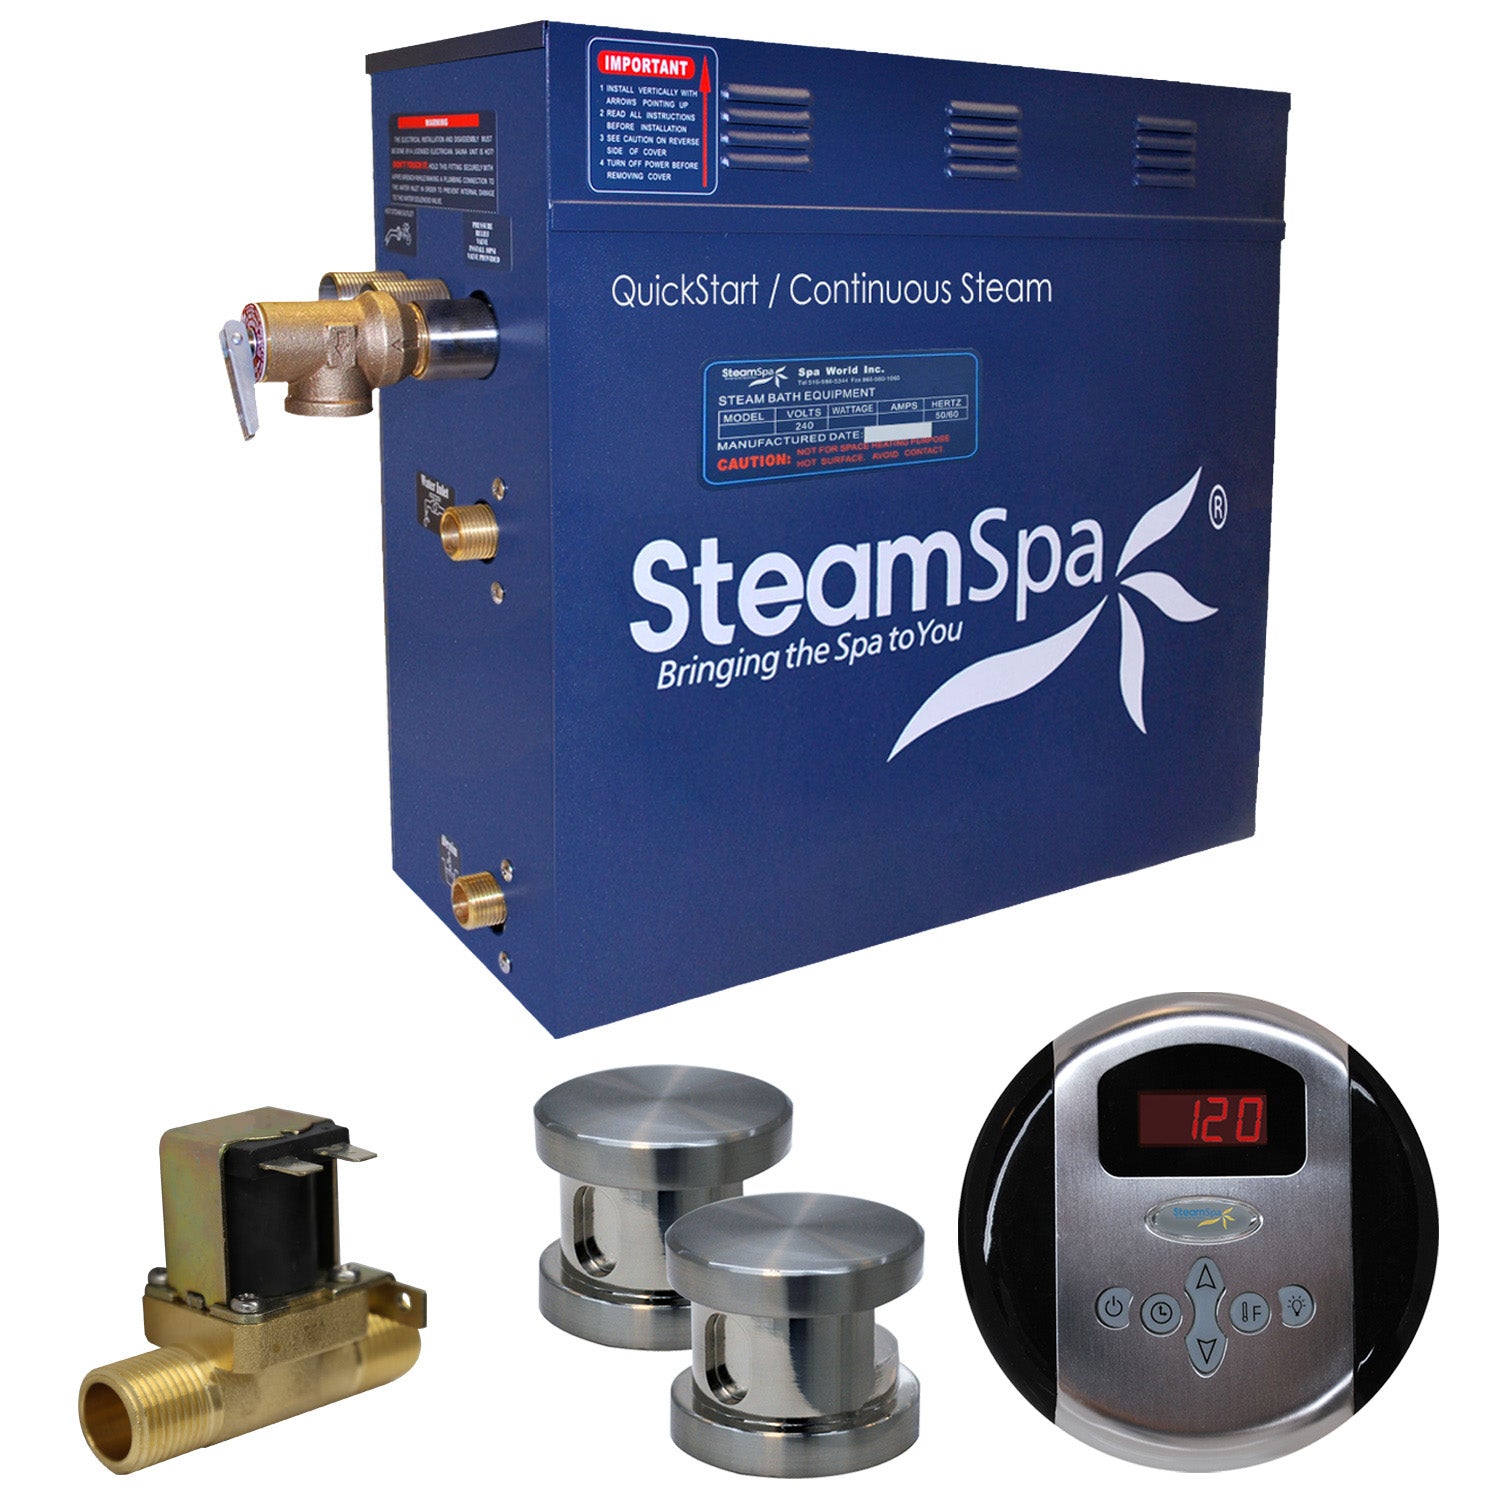 SteamSpa Oasis 10.5 KW QuickStart Acu-Steam Bath Generator Package - 9.5 in. L x 17 in. W x 15 in. H - Stainless Steel - Brushed Nickel - Includes a 10.5kW QuickStart Acu-Steam Bath Generator, Control Panel, Two Steam heads, Pressure Relief Valve, OA1050 - Vital Hydrotherapy